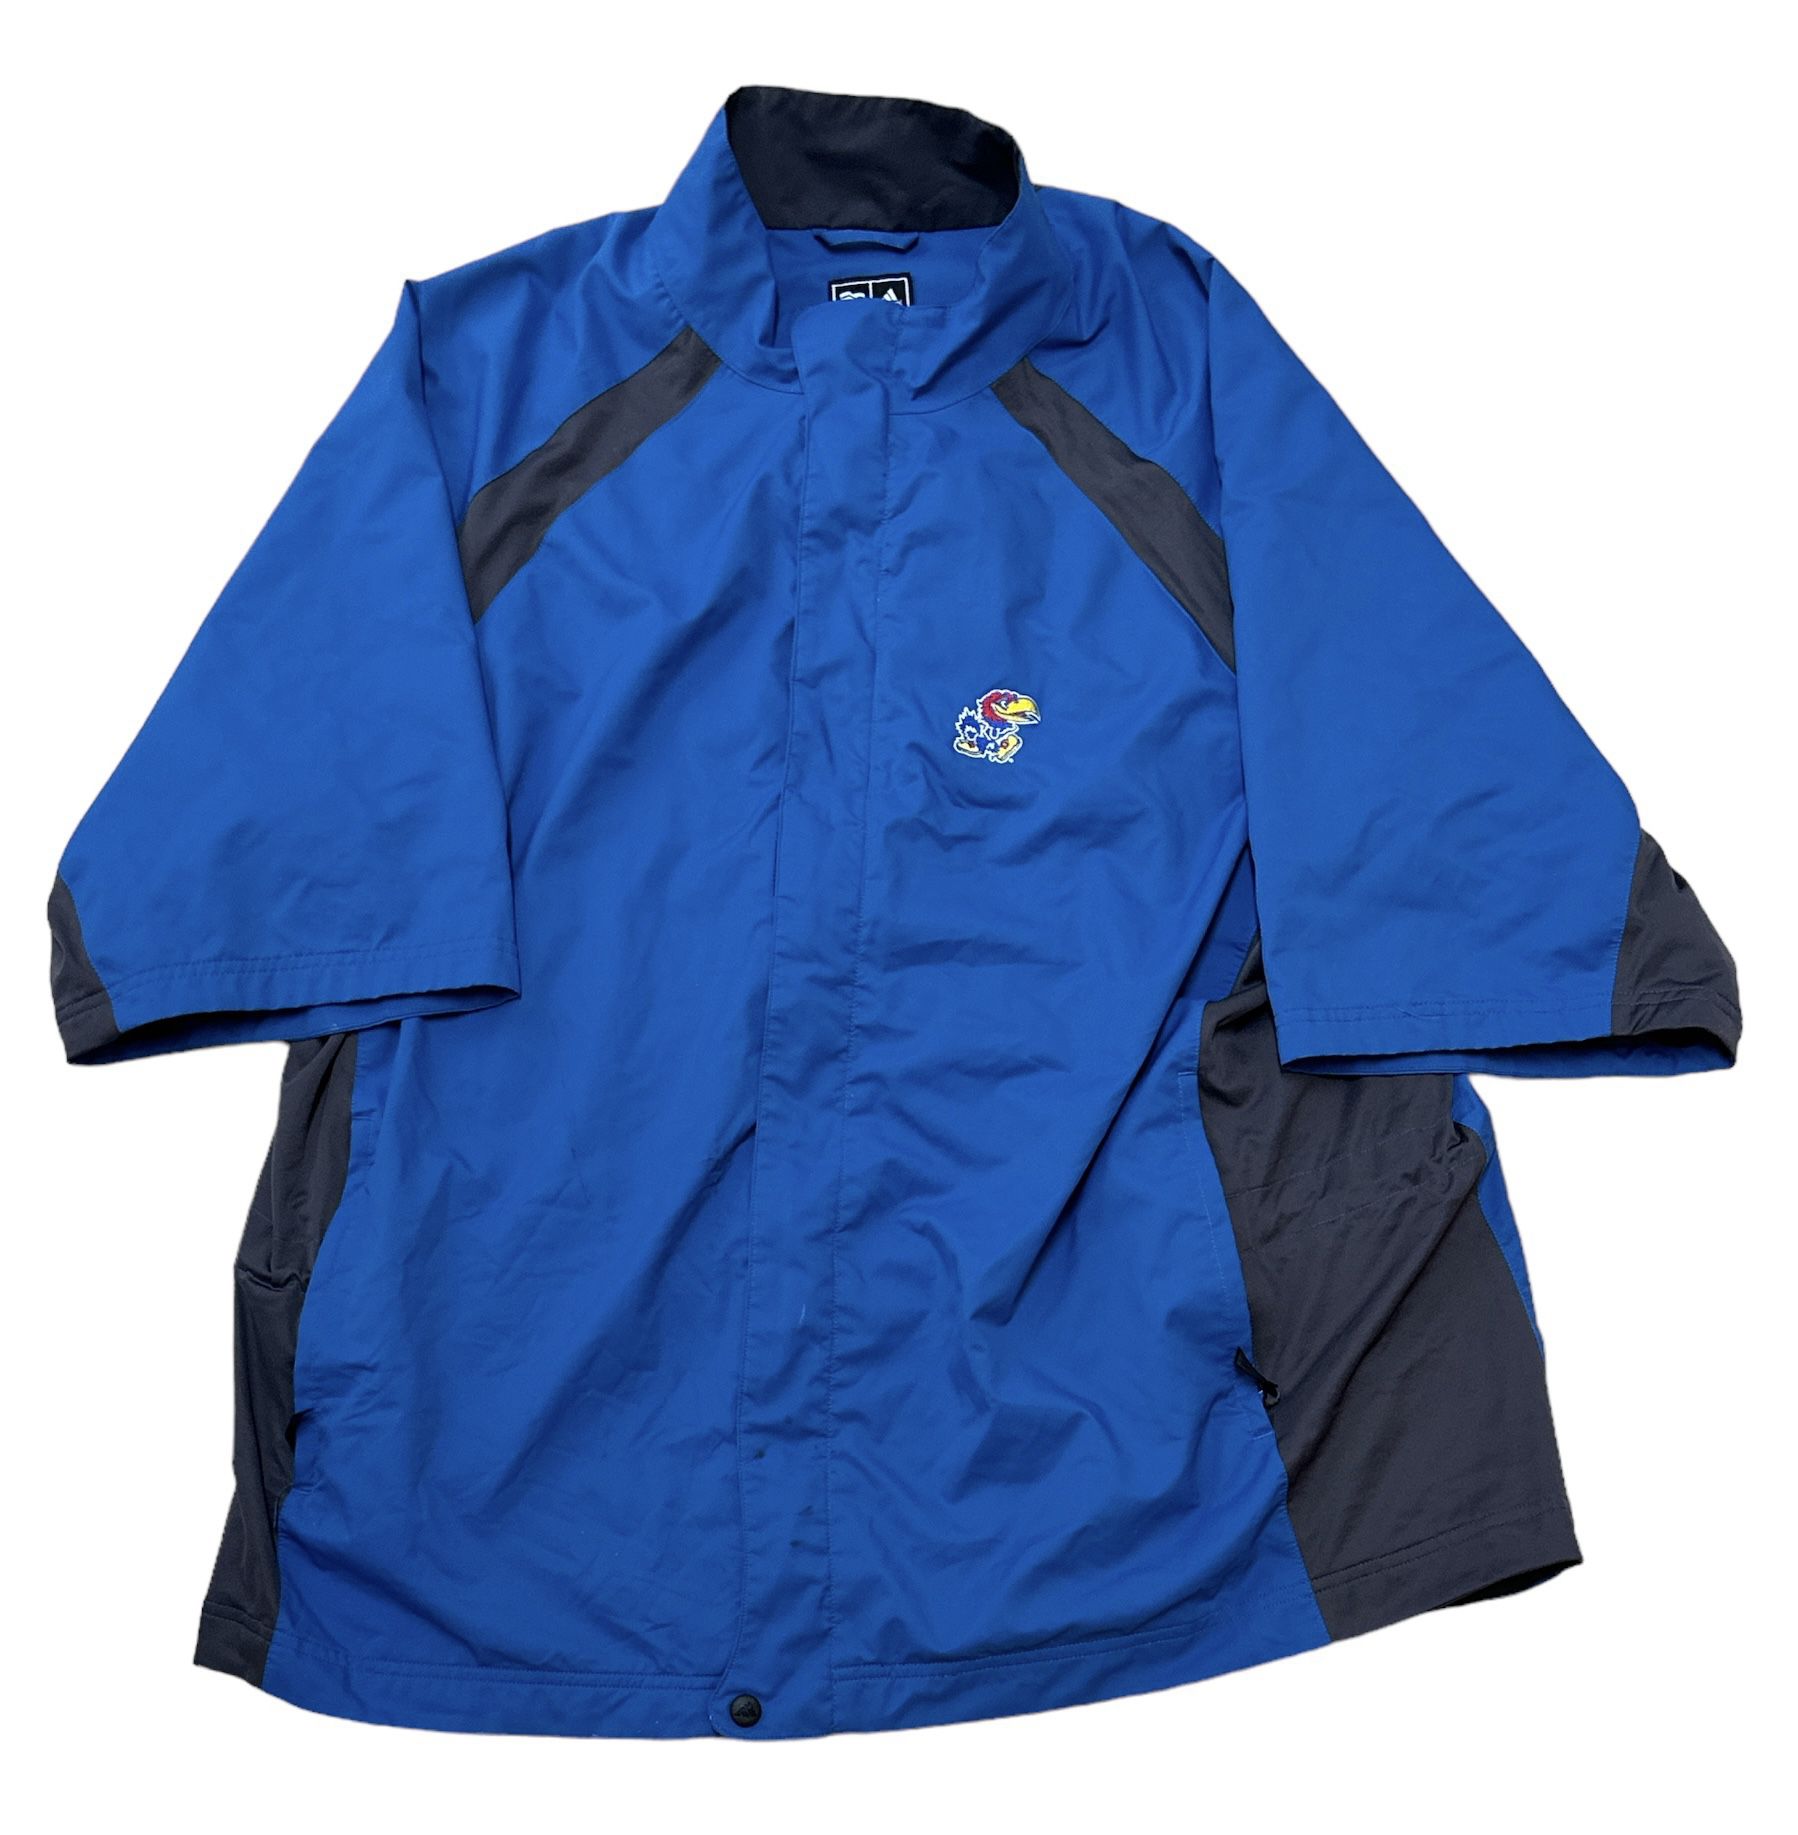 Brand: Adidas KU Short Sleeve ClimaProof Storm Windbreaker Jacket  Color: Colorblock Blue, Black  Size XXL Jacket has 5 small dot stains as shown on p